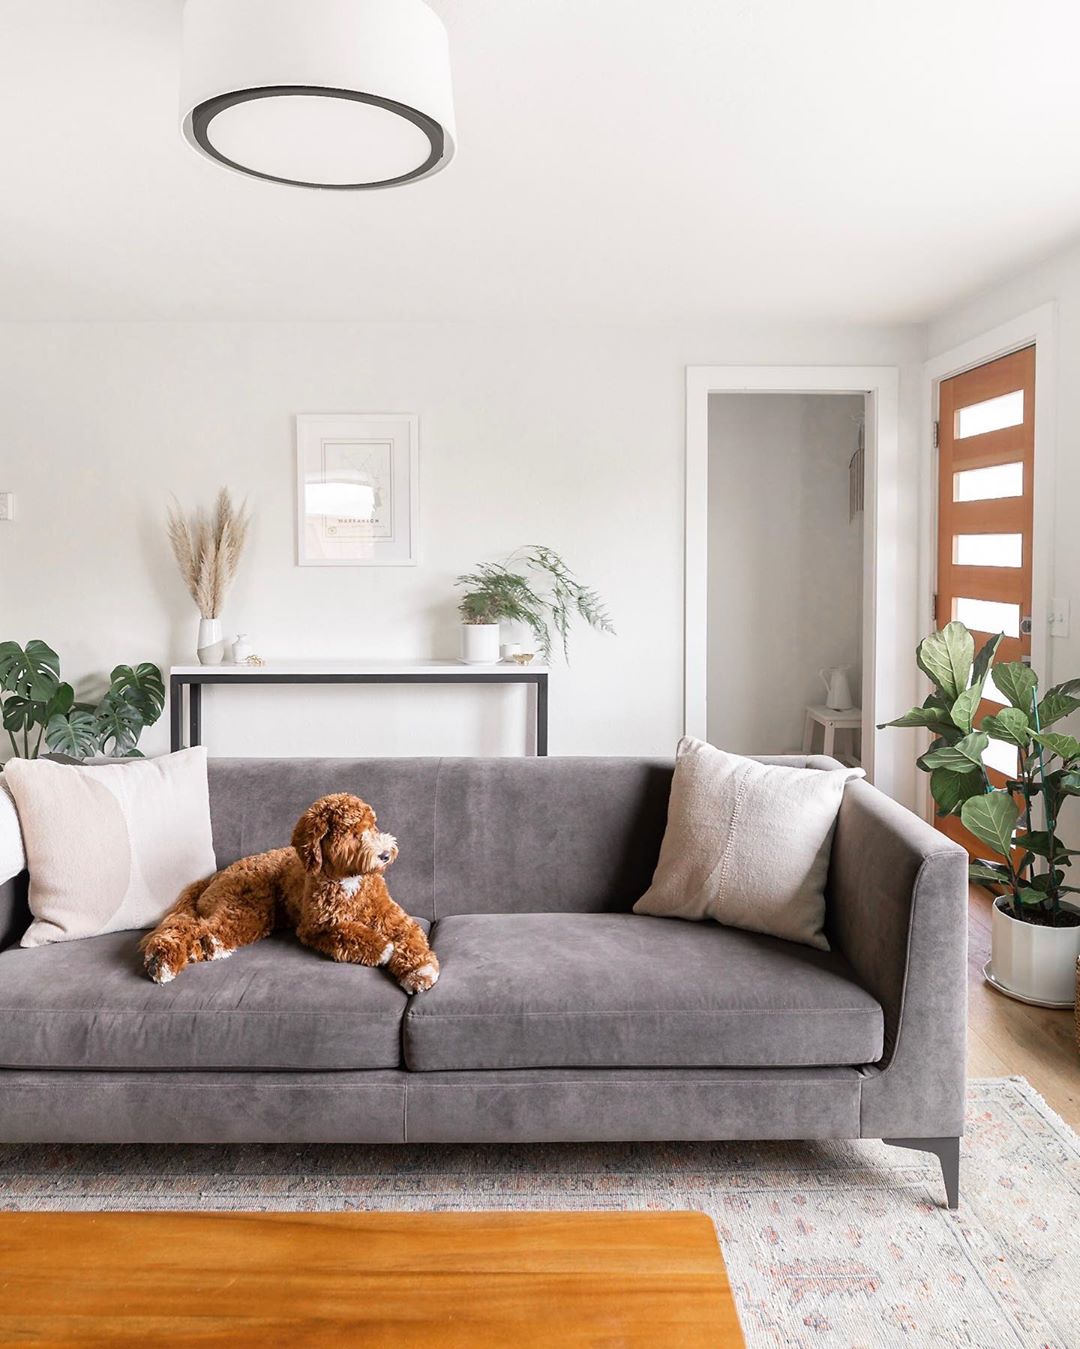 White-painted living room with tan dog on gray couch. Photo by Instagram user @littlecitybungalow